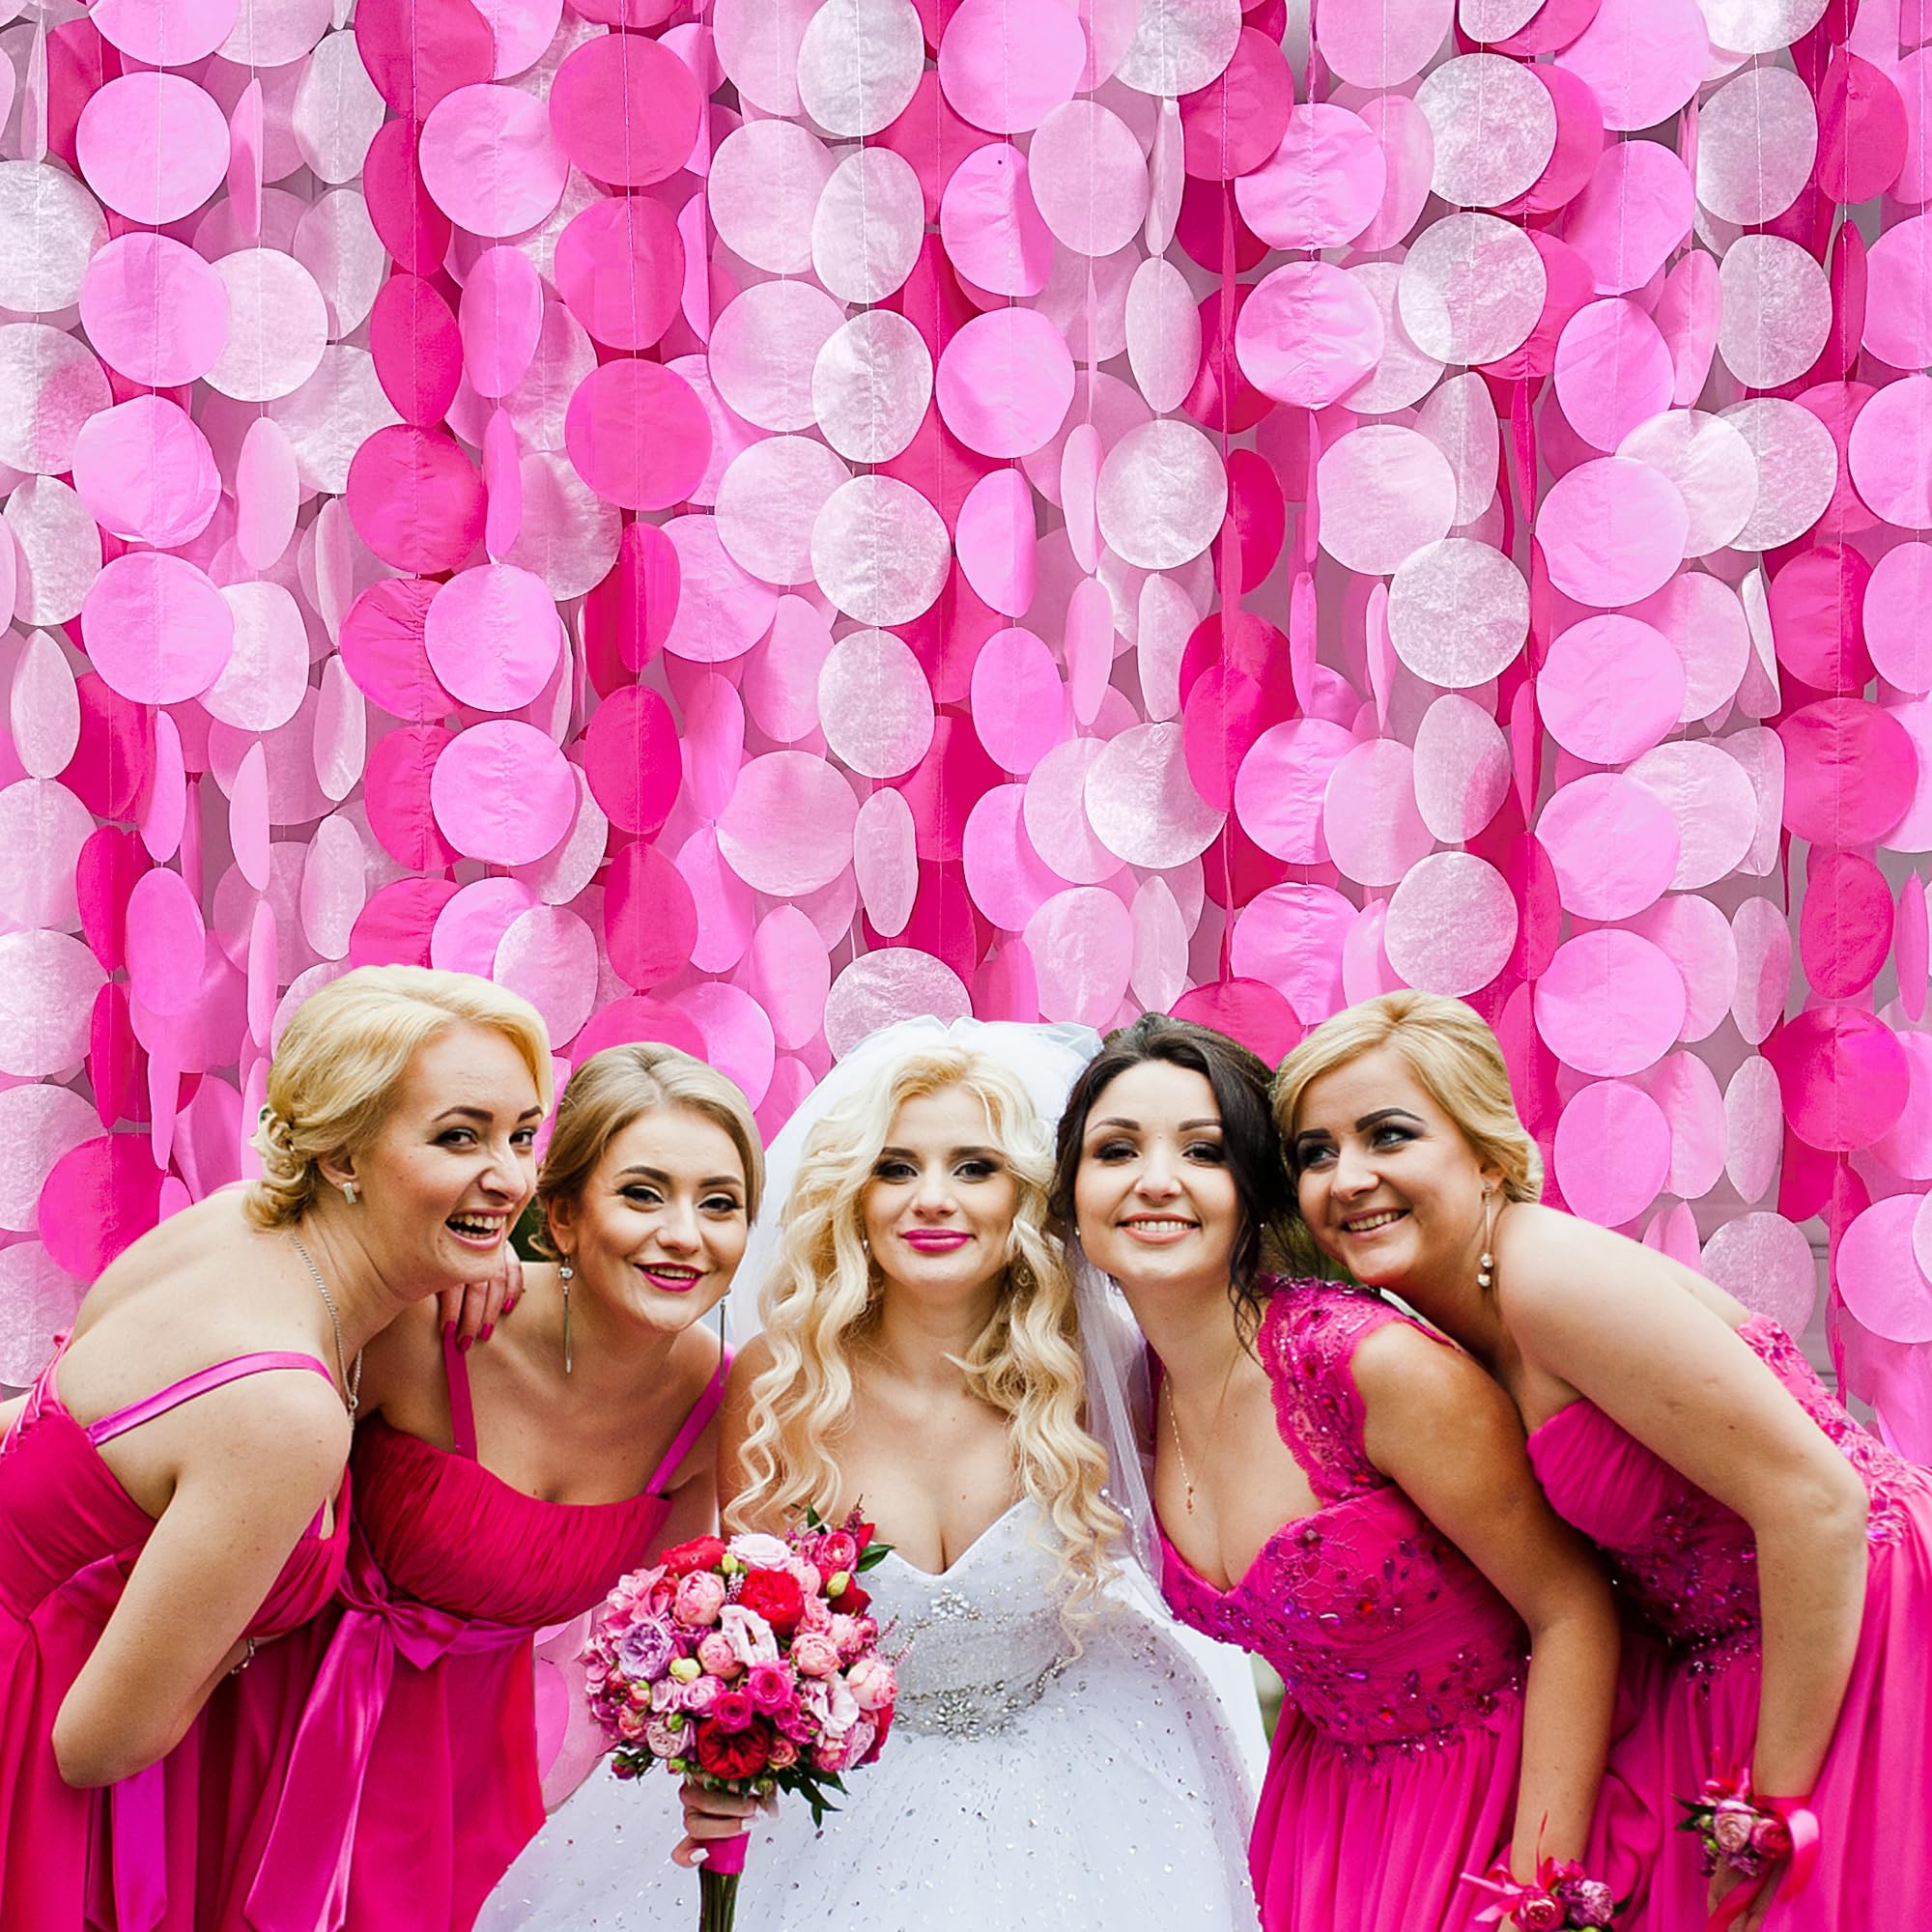 205Ft Hot Pink Party Decorations Big Polka Dots Backdrop Garland Rose Pink Circle Dots Tissue Paper Hanging Curtain Streamer for Bachelorette Birthday Bridal Shower Wedding Engagement Party Supplies